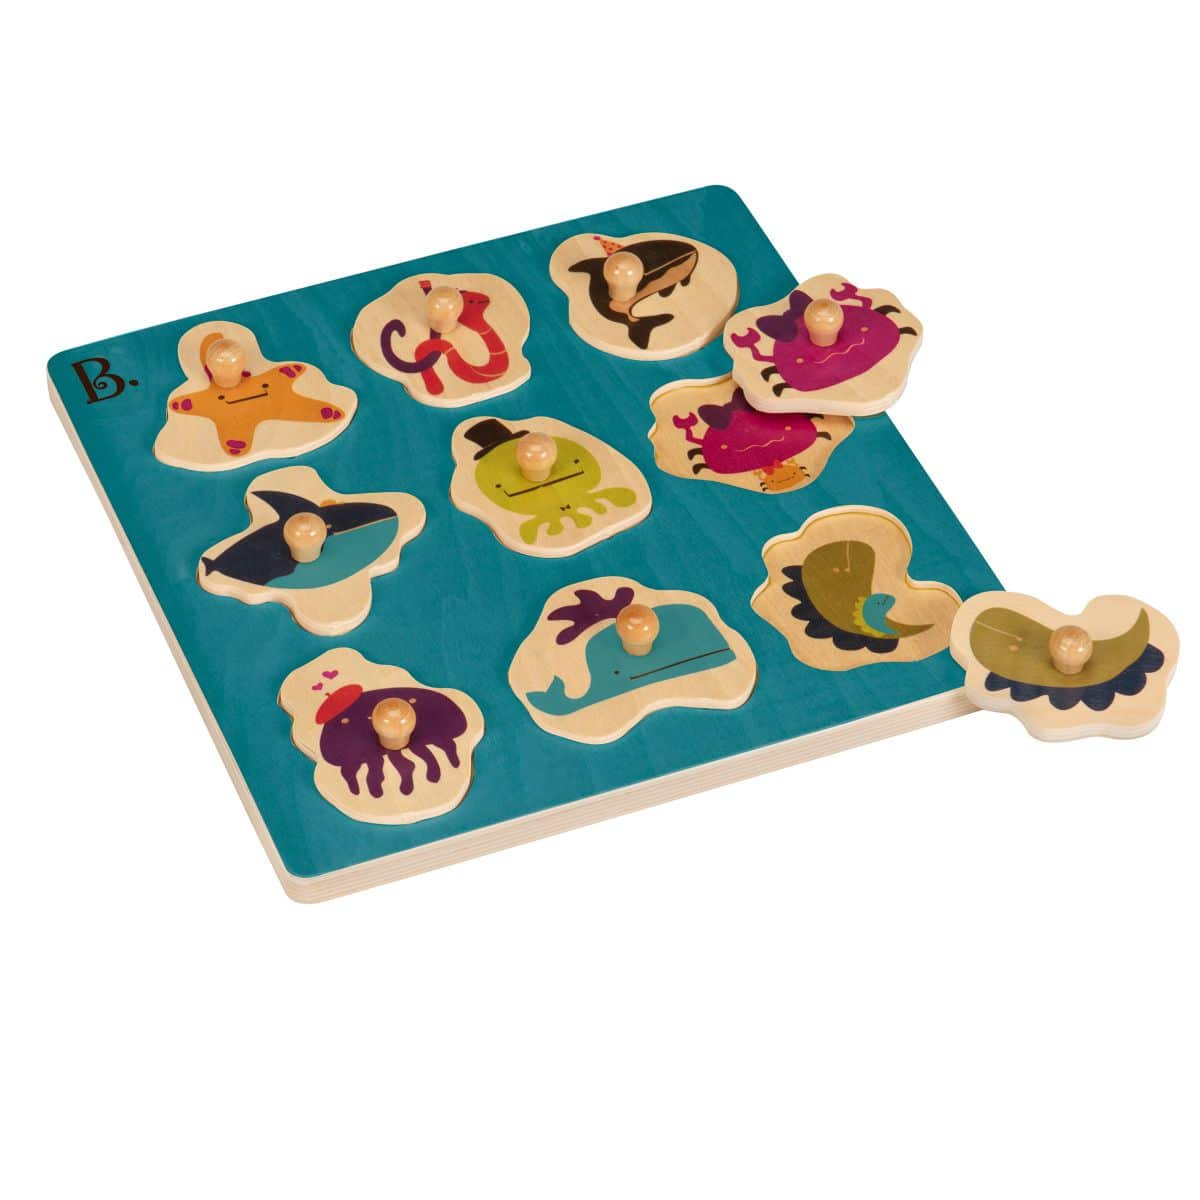 Ocean-themed wooden peg puzzle